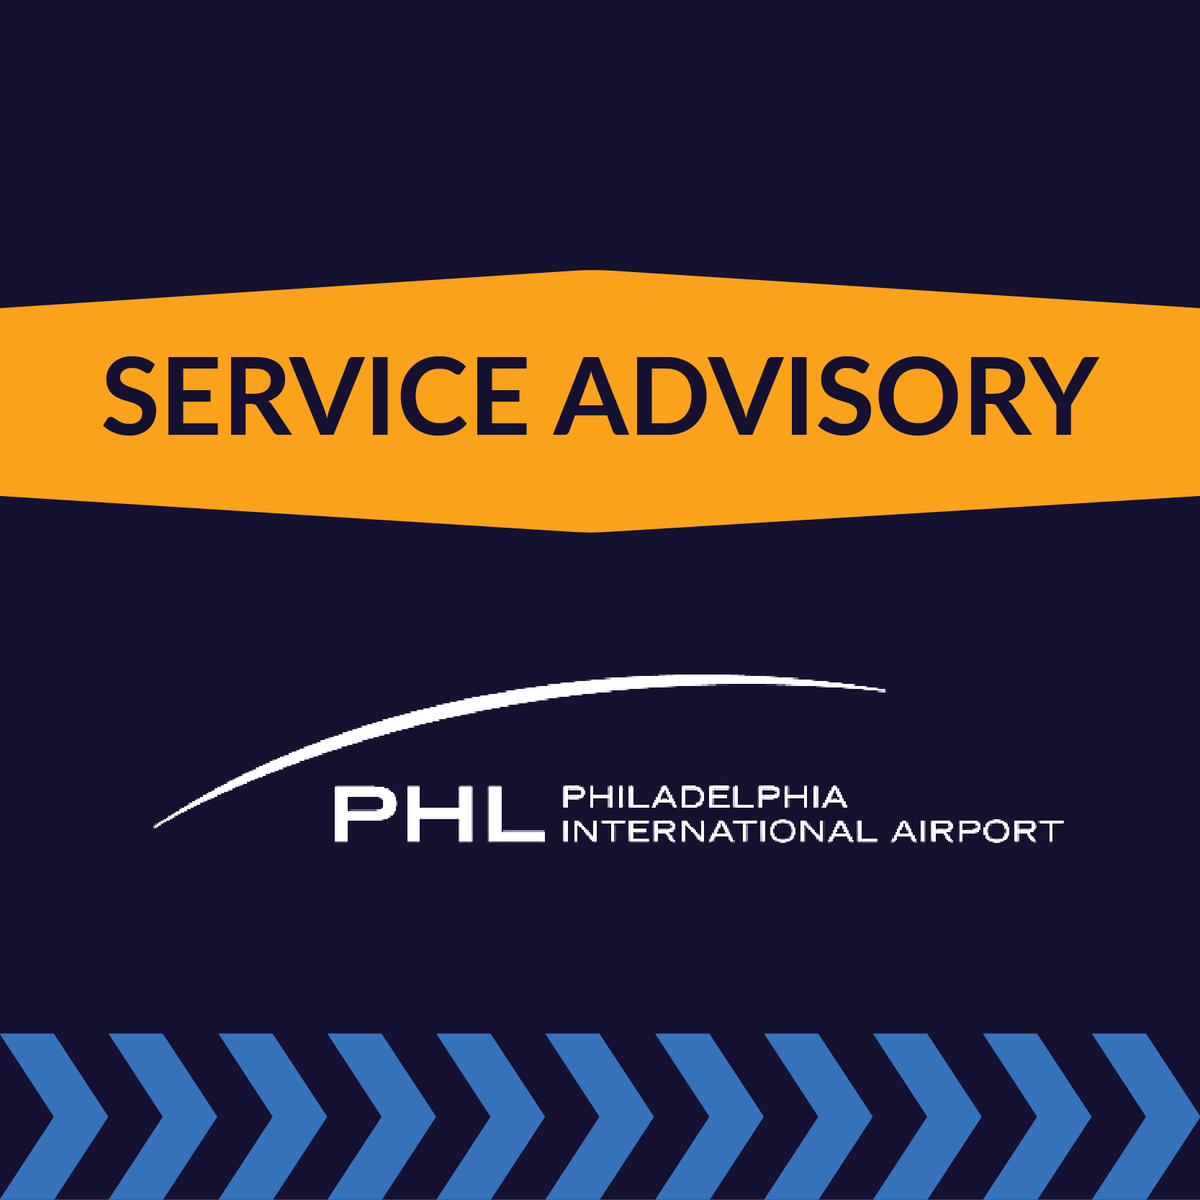 Accessibility alert: Elevators from the Terminal C flight check-in area to TSA security checkpoint C will be out of service May 6-10 for upgrades. Passengers who need elevators should check in at A-East, A-West or B. For TSA info, visit ow.ly/kU8750Rw8Vr.